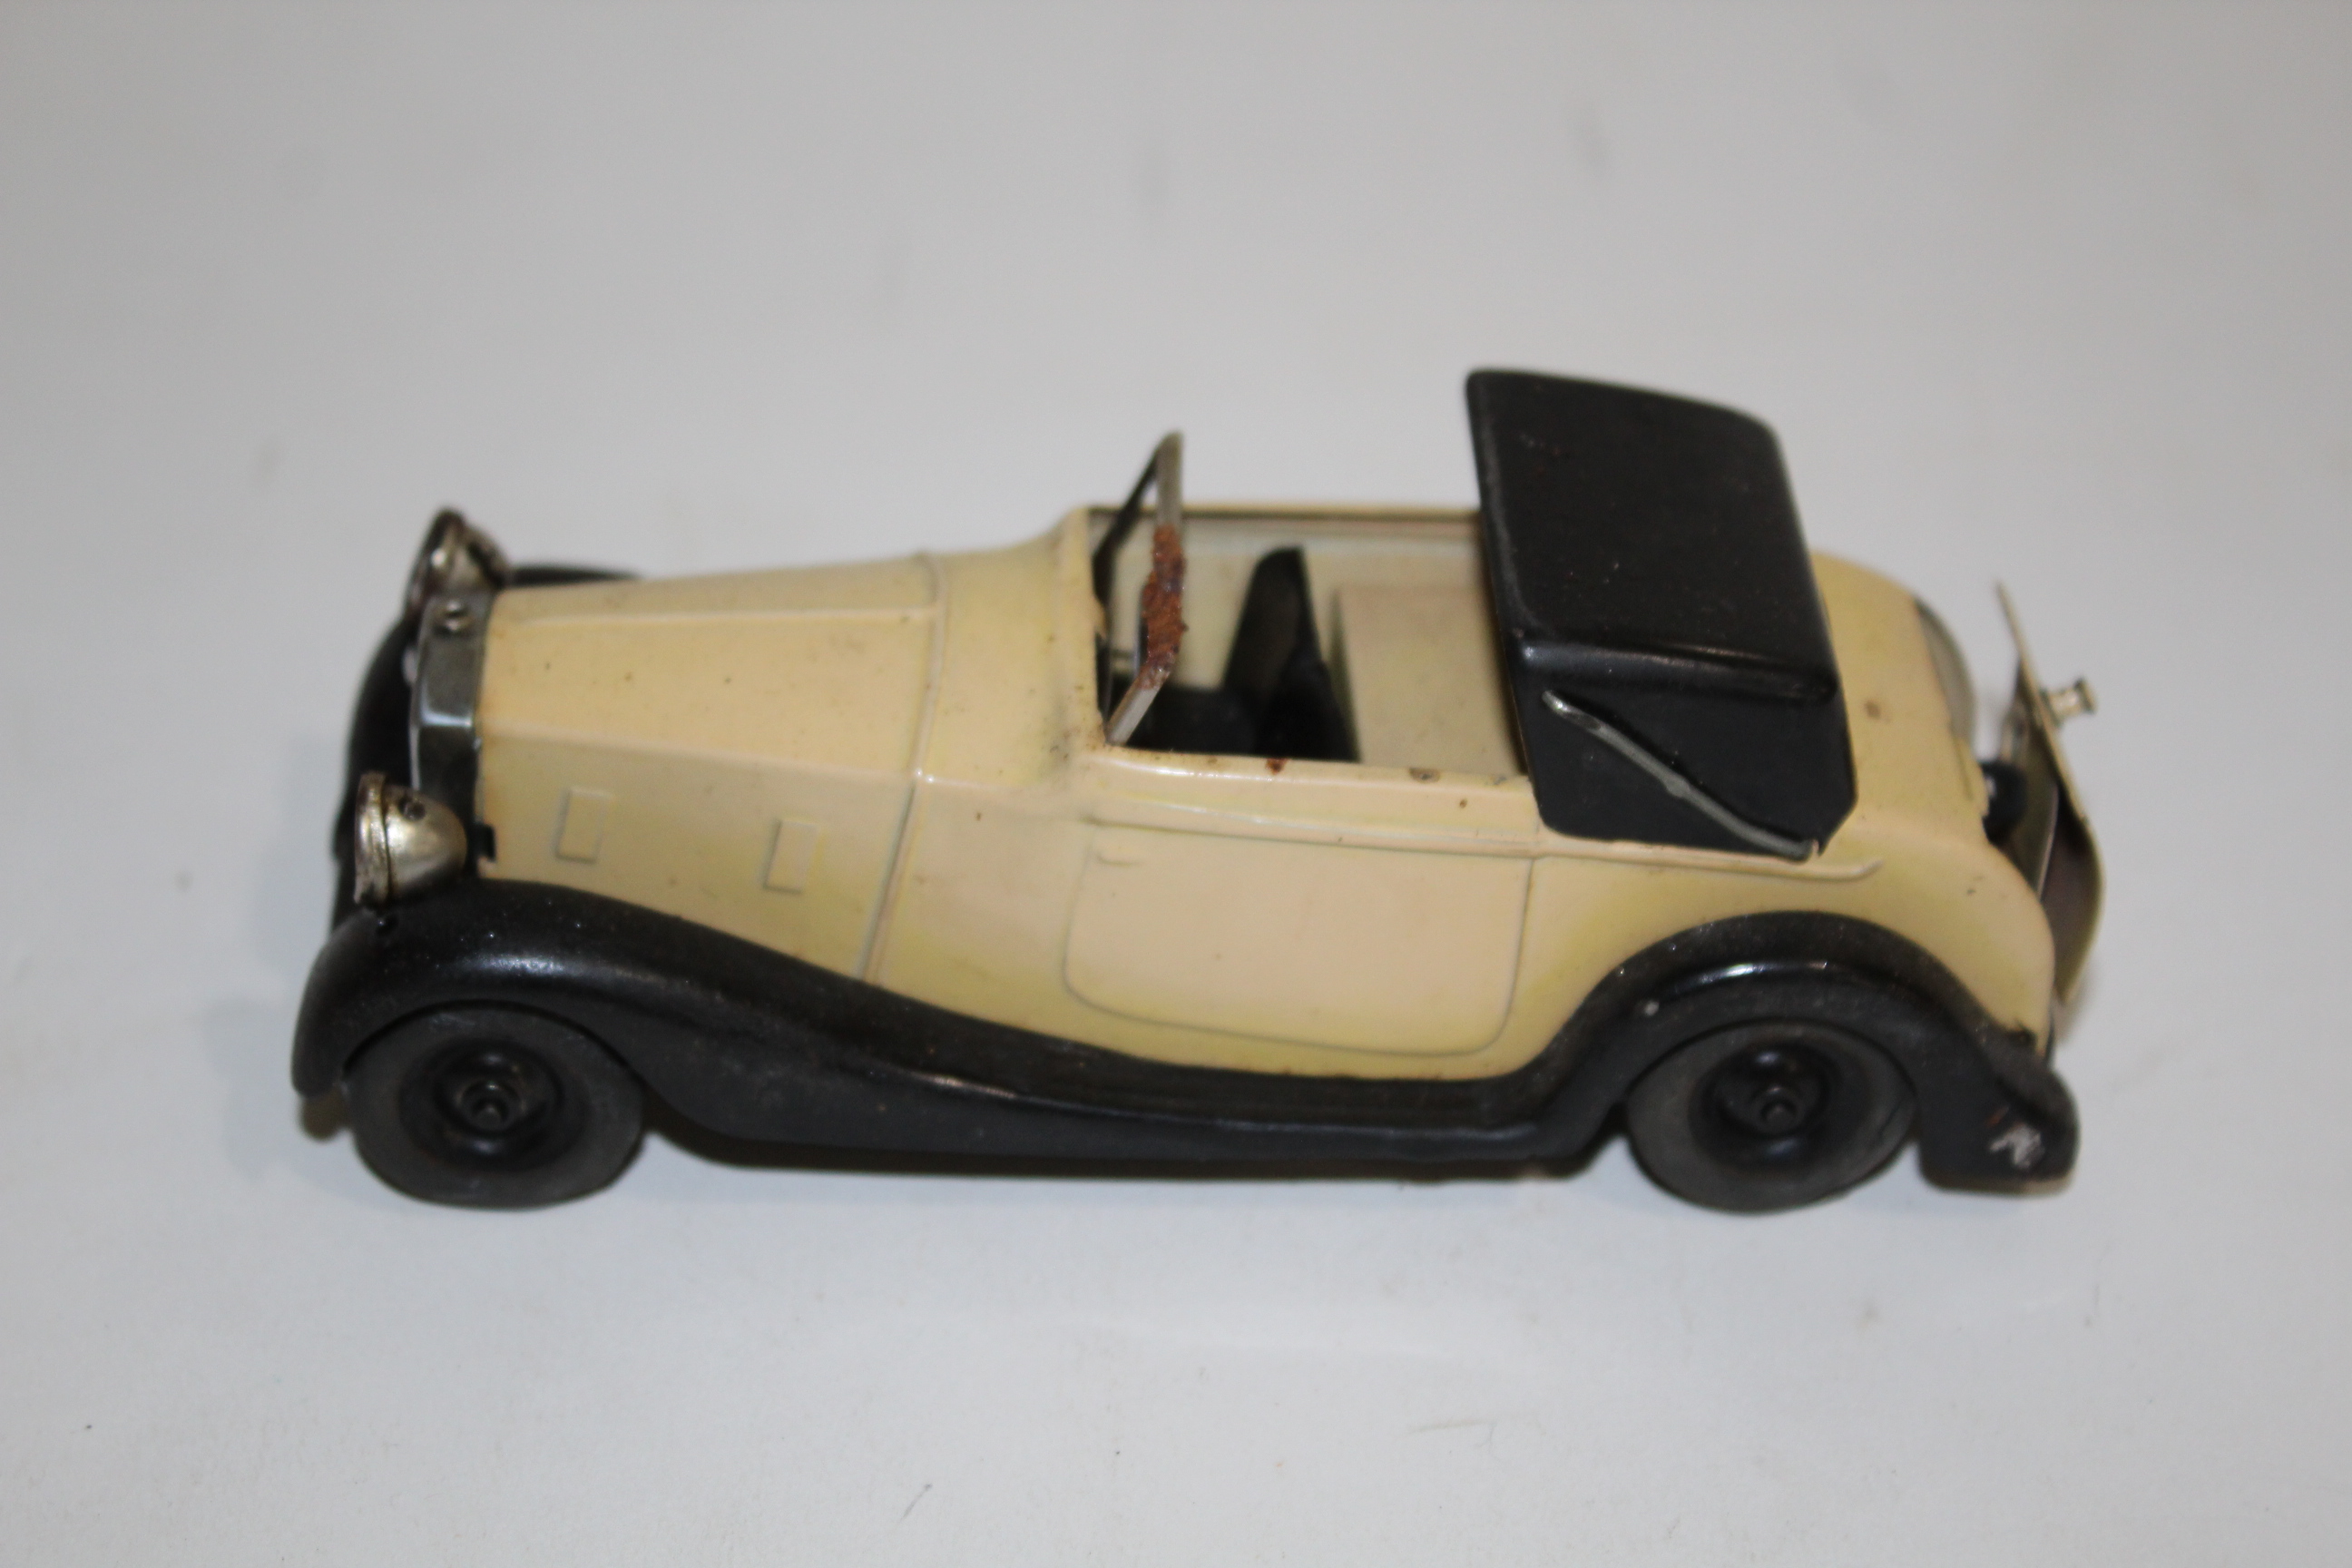 RARE TRIANG MINIC ROLLS ROYCE SEDANCA - ELECTRIC HEADLAMPS Model No 50M, with a black hood and wings - Image 12 of 14